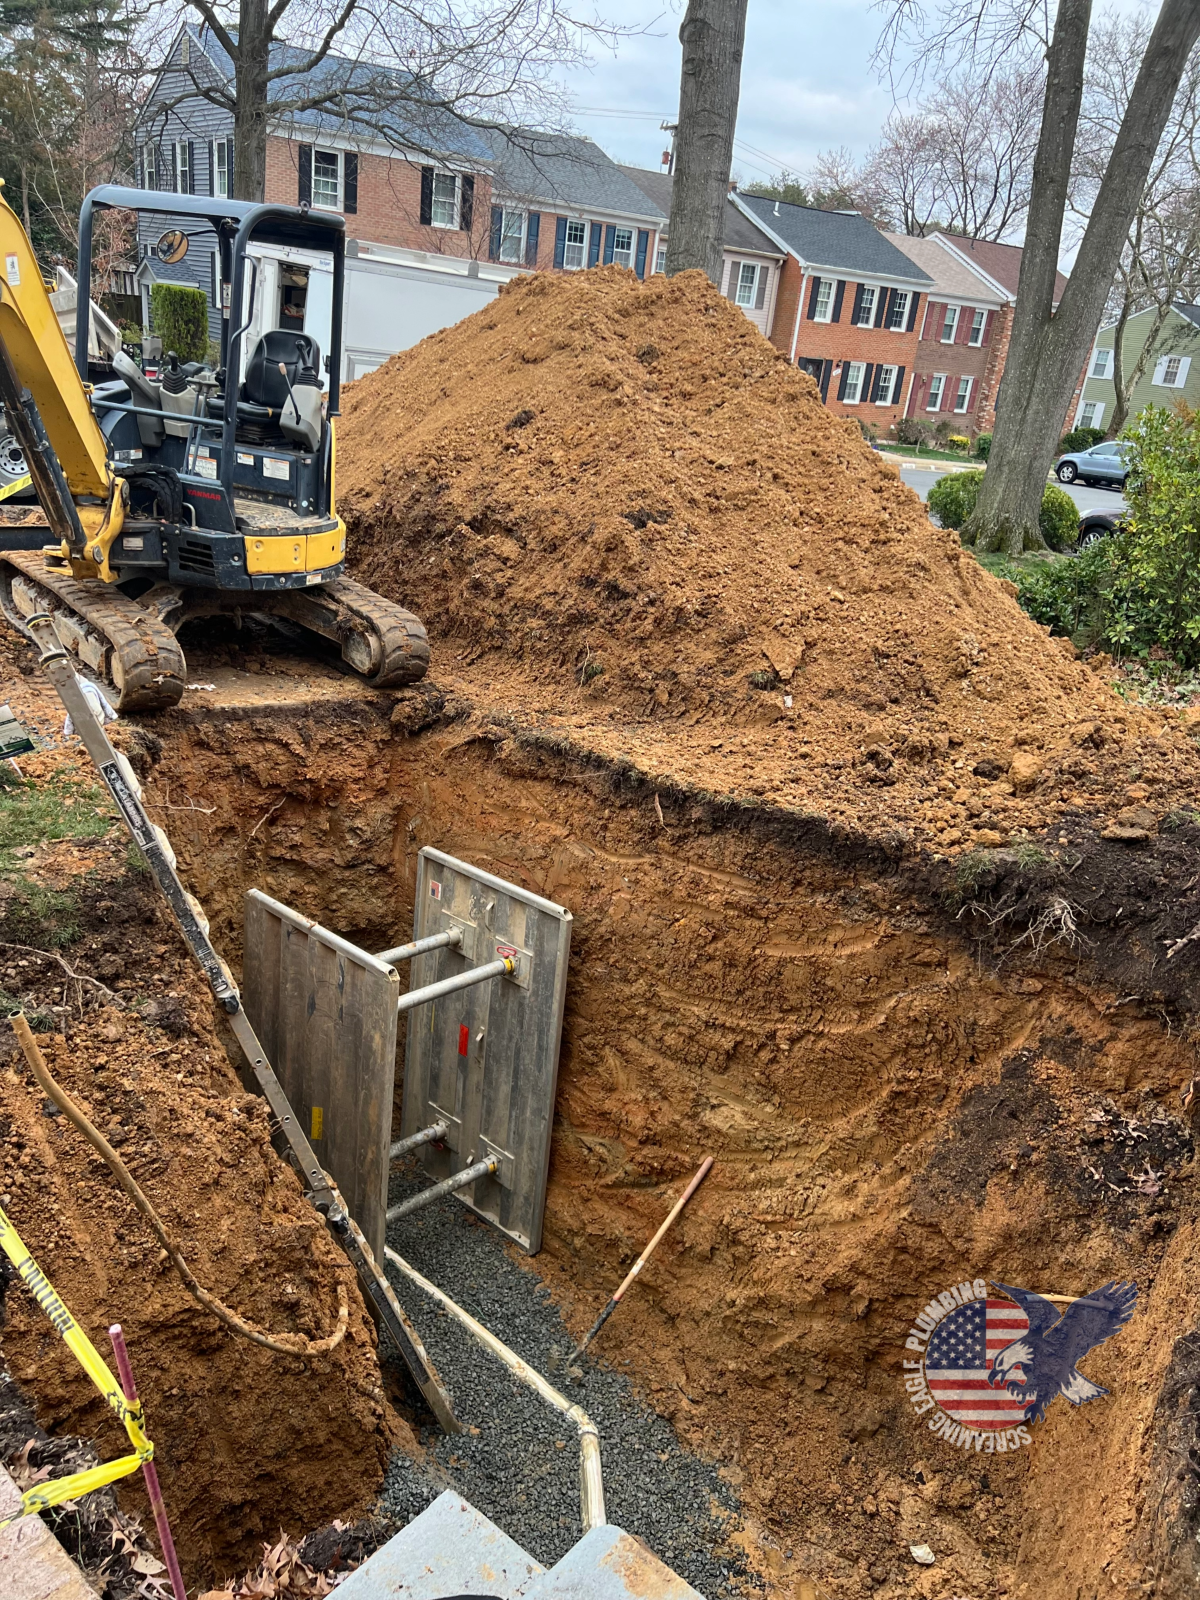 sewer repair services, trenchless pipe relining, pipe bursting, sewer inspection services, residential plumbing solutions